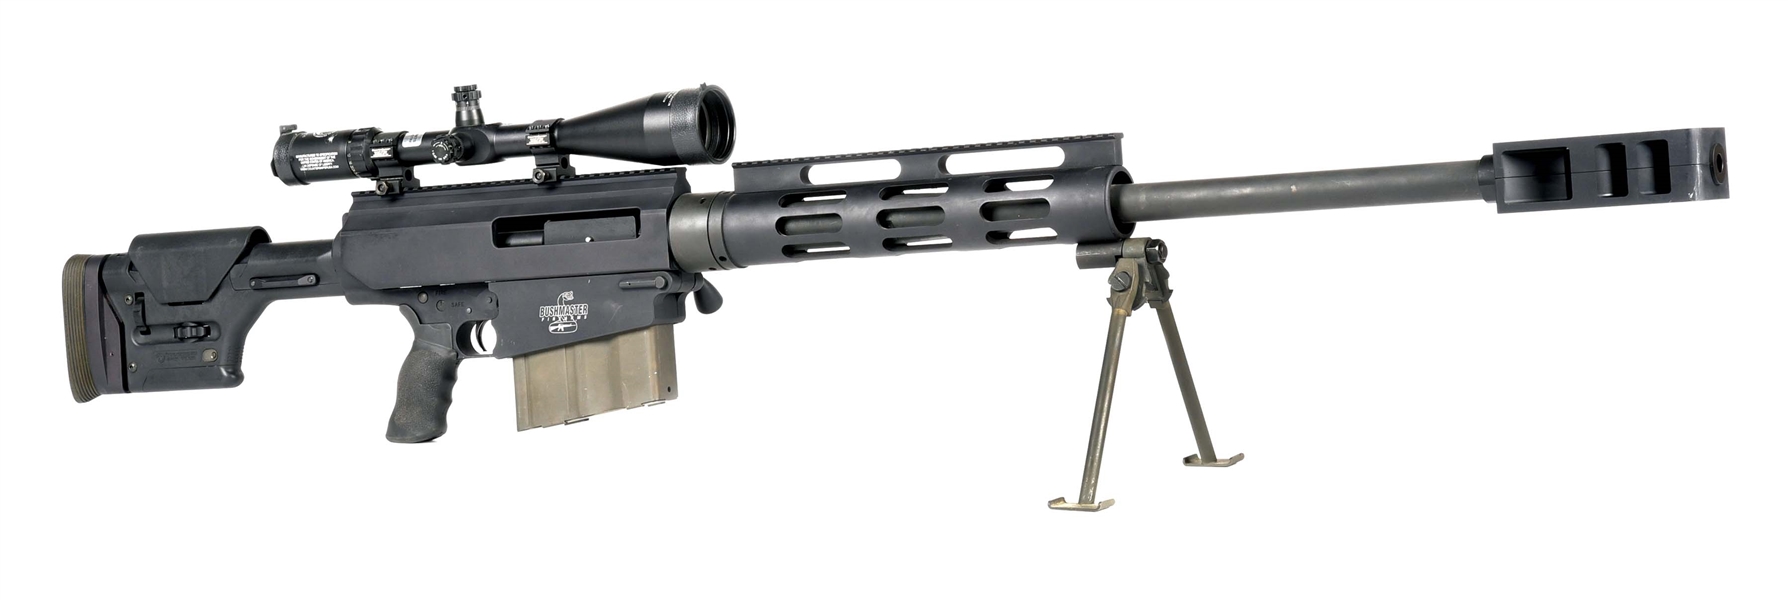 (M) BUSHMASTER BA50 .50BMG BOLT ACTION RIFLE WITH COUNTER SNIPER MILITARY OPTICAL GUNSIGHT CORP SCOPE.